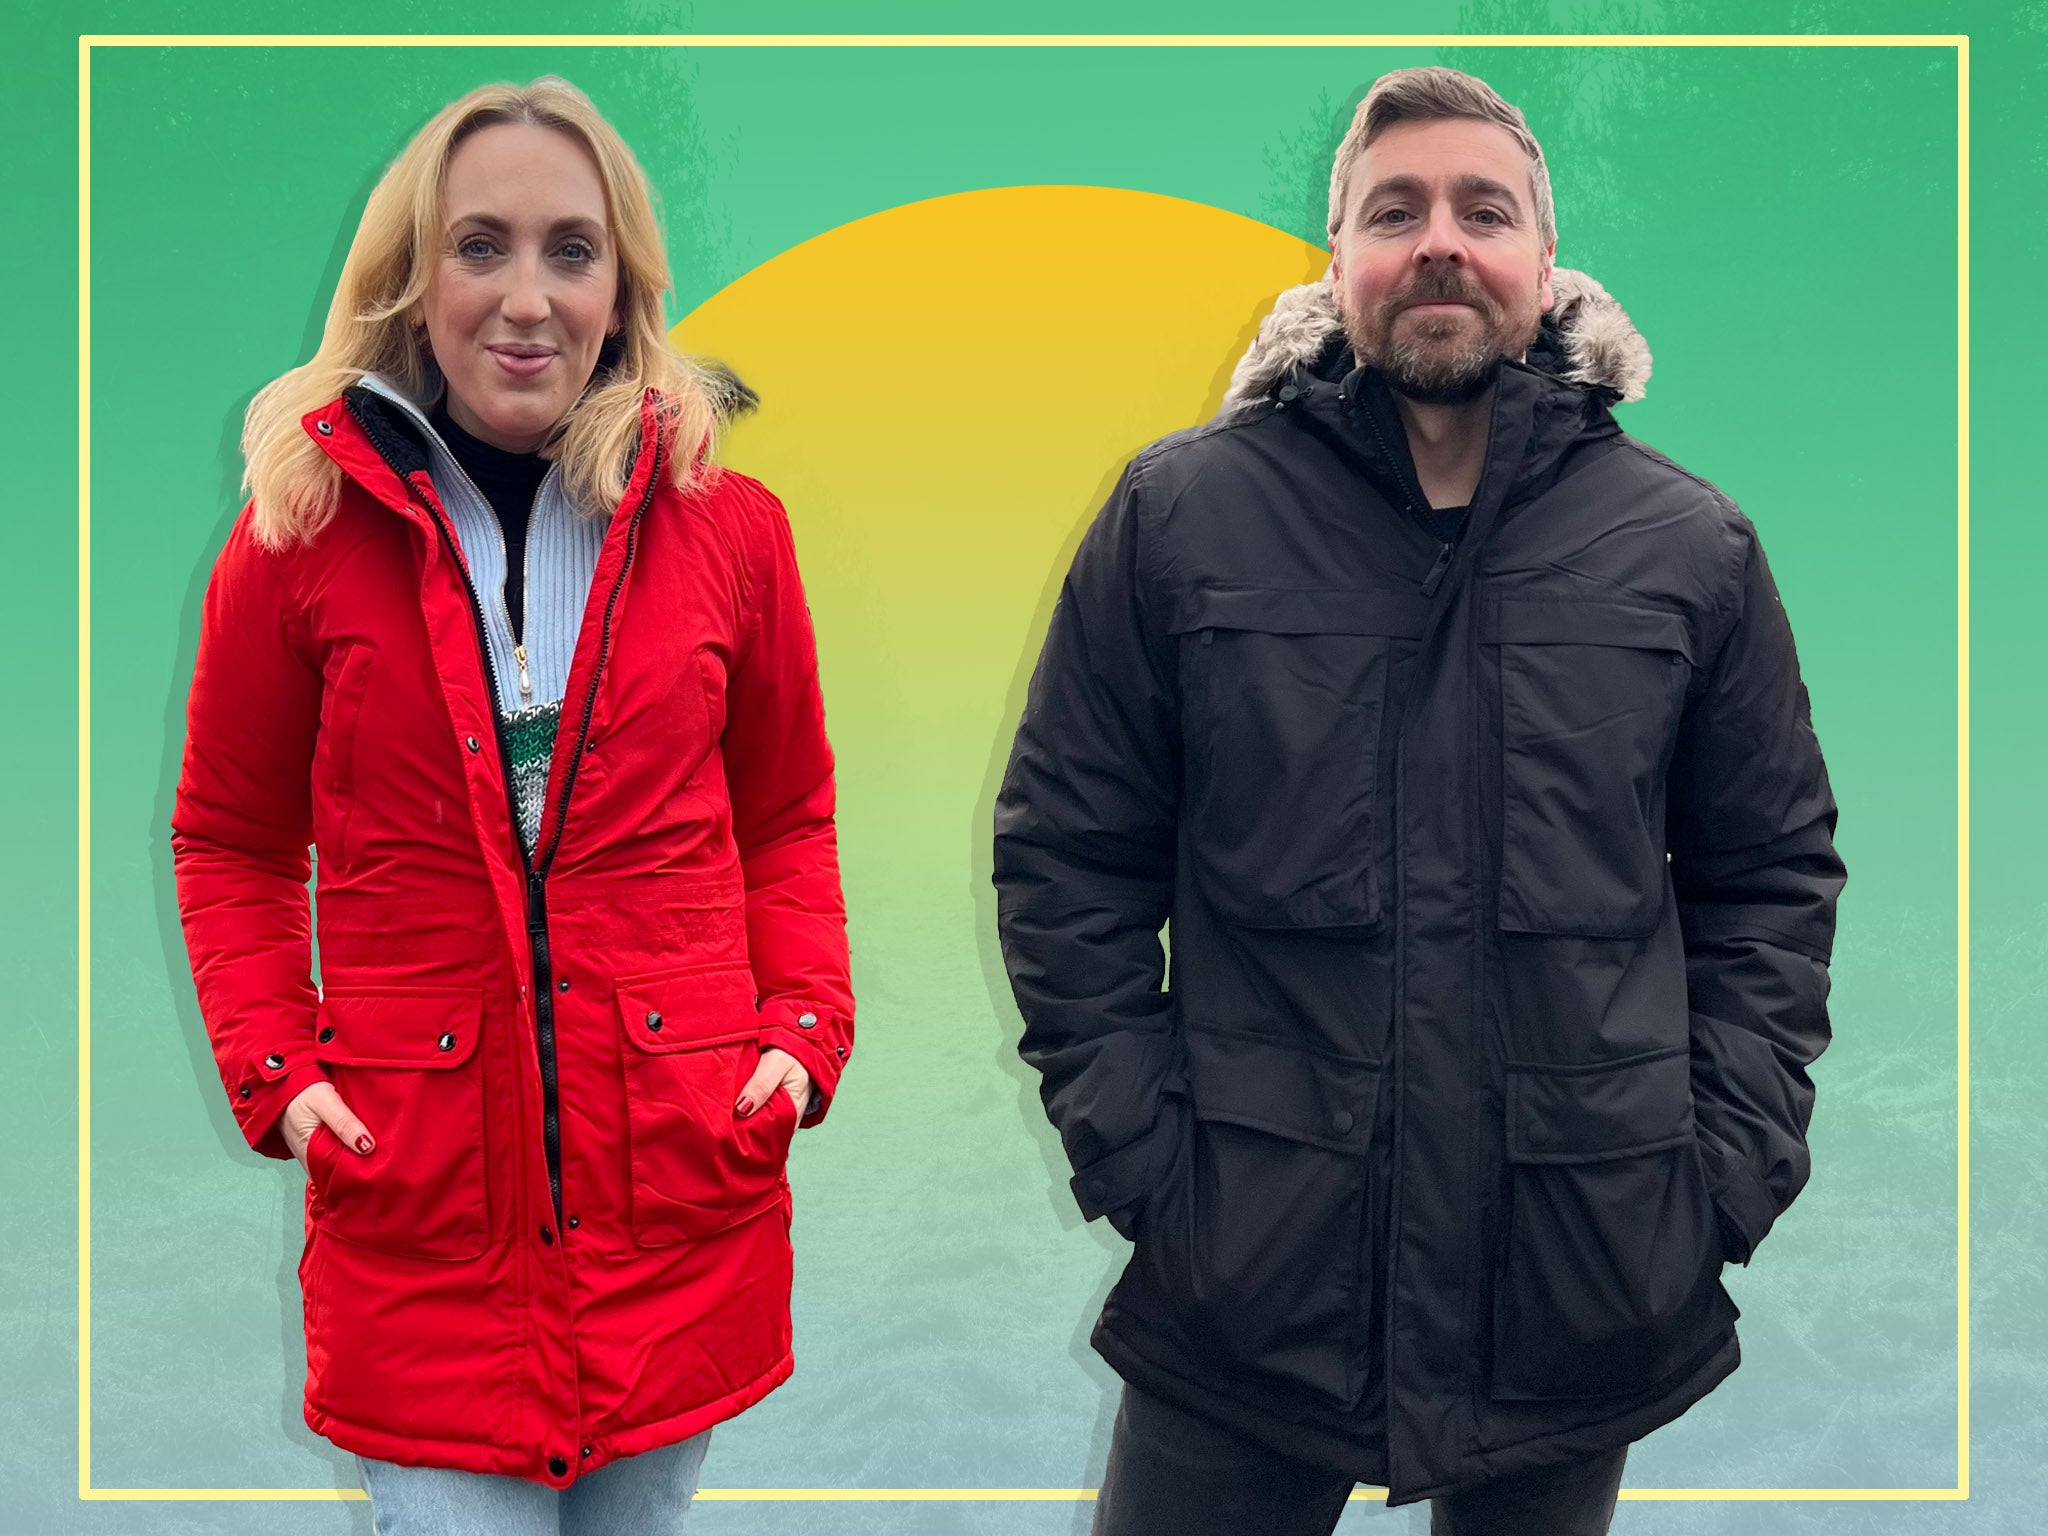 Nuttig Pathologisch conjunctie Regatta heated jacket review: Battery-powered warmth for men and women |  The Independent